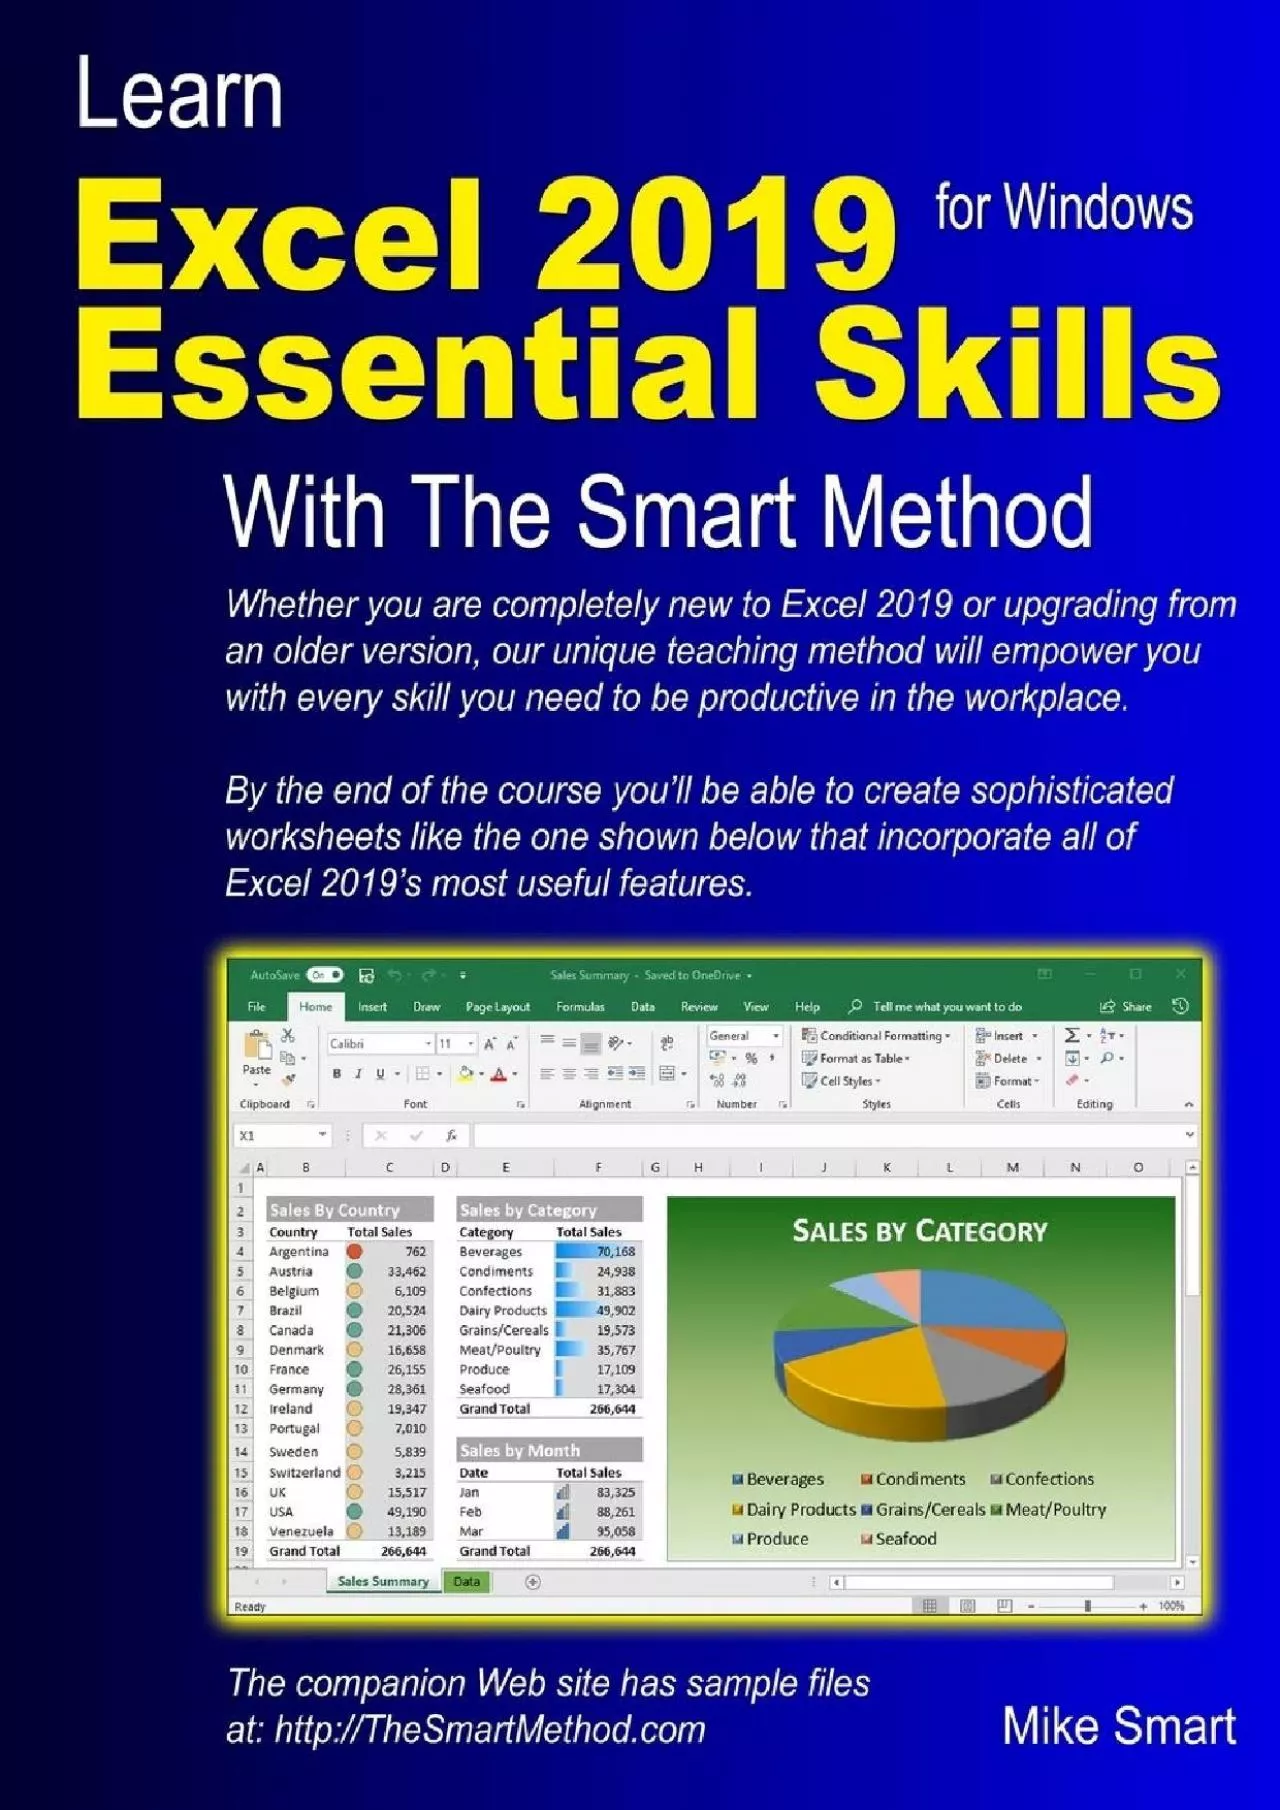 Learn Excel 2019 Essential Skills with The Smart Method: Tutorial for self-instruction